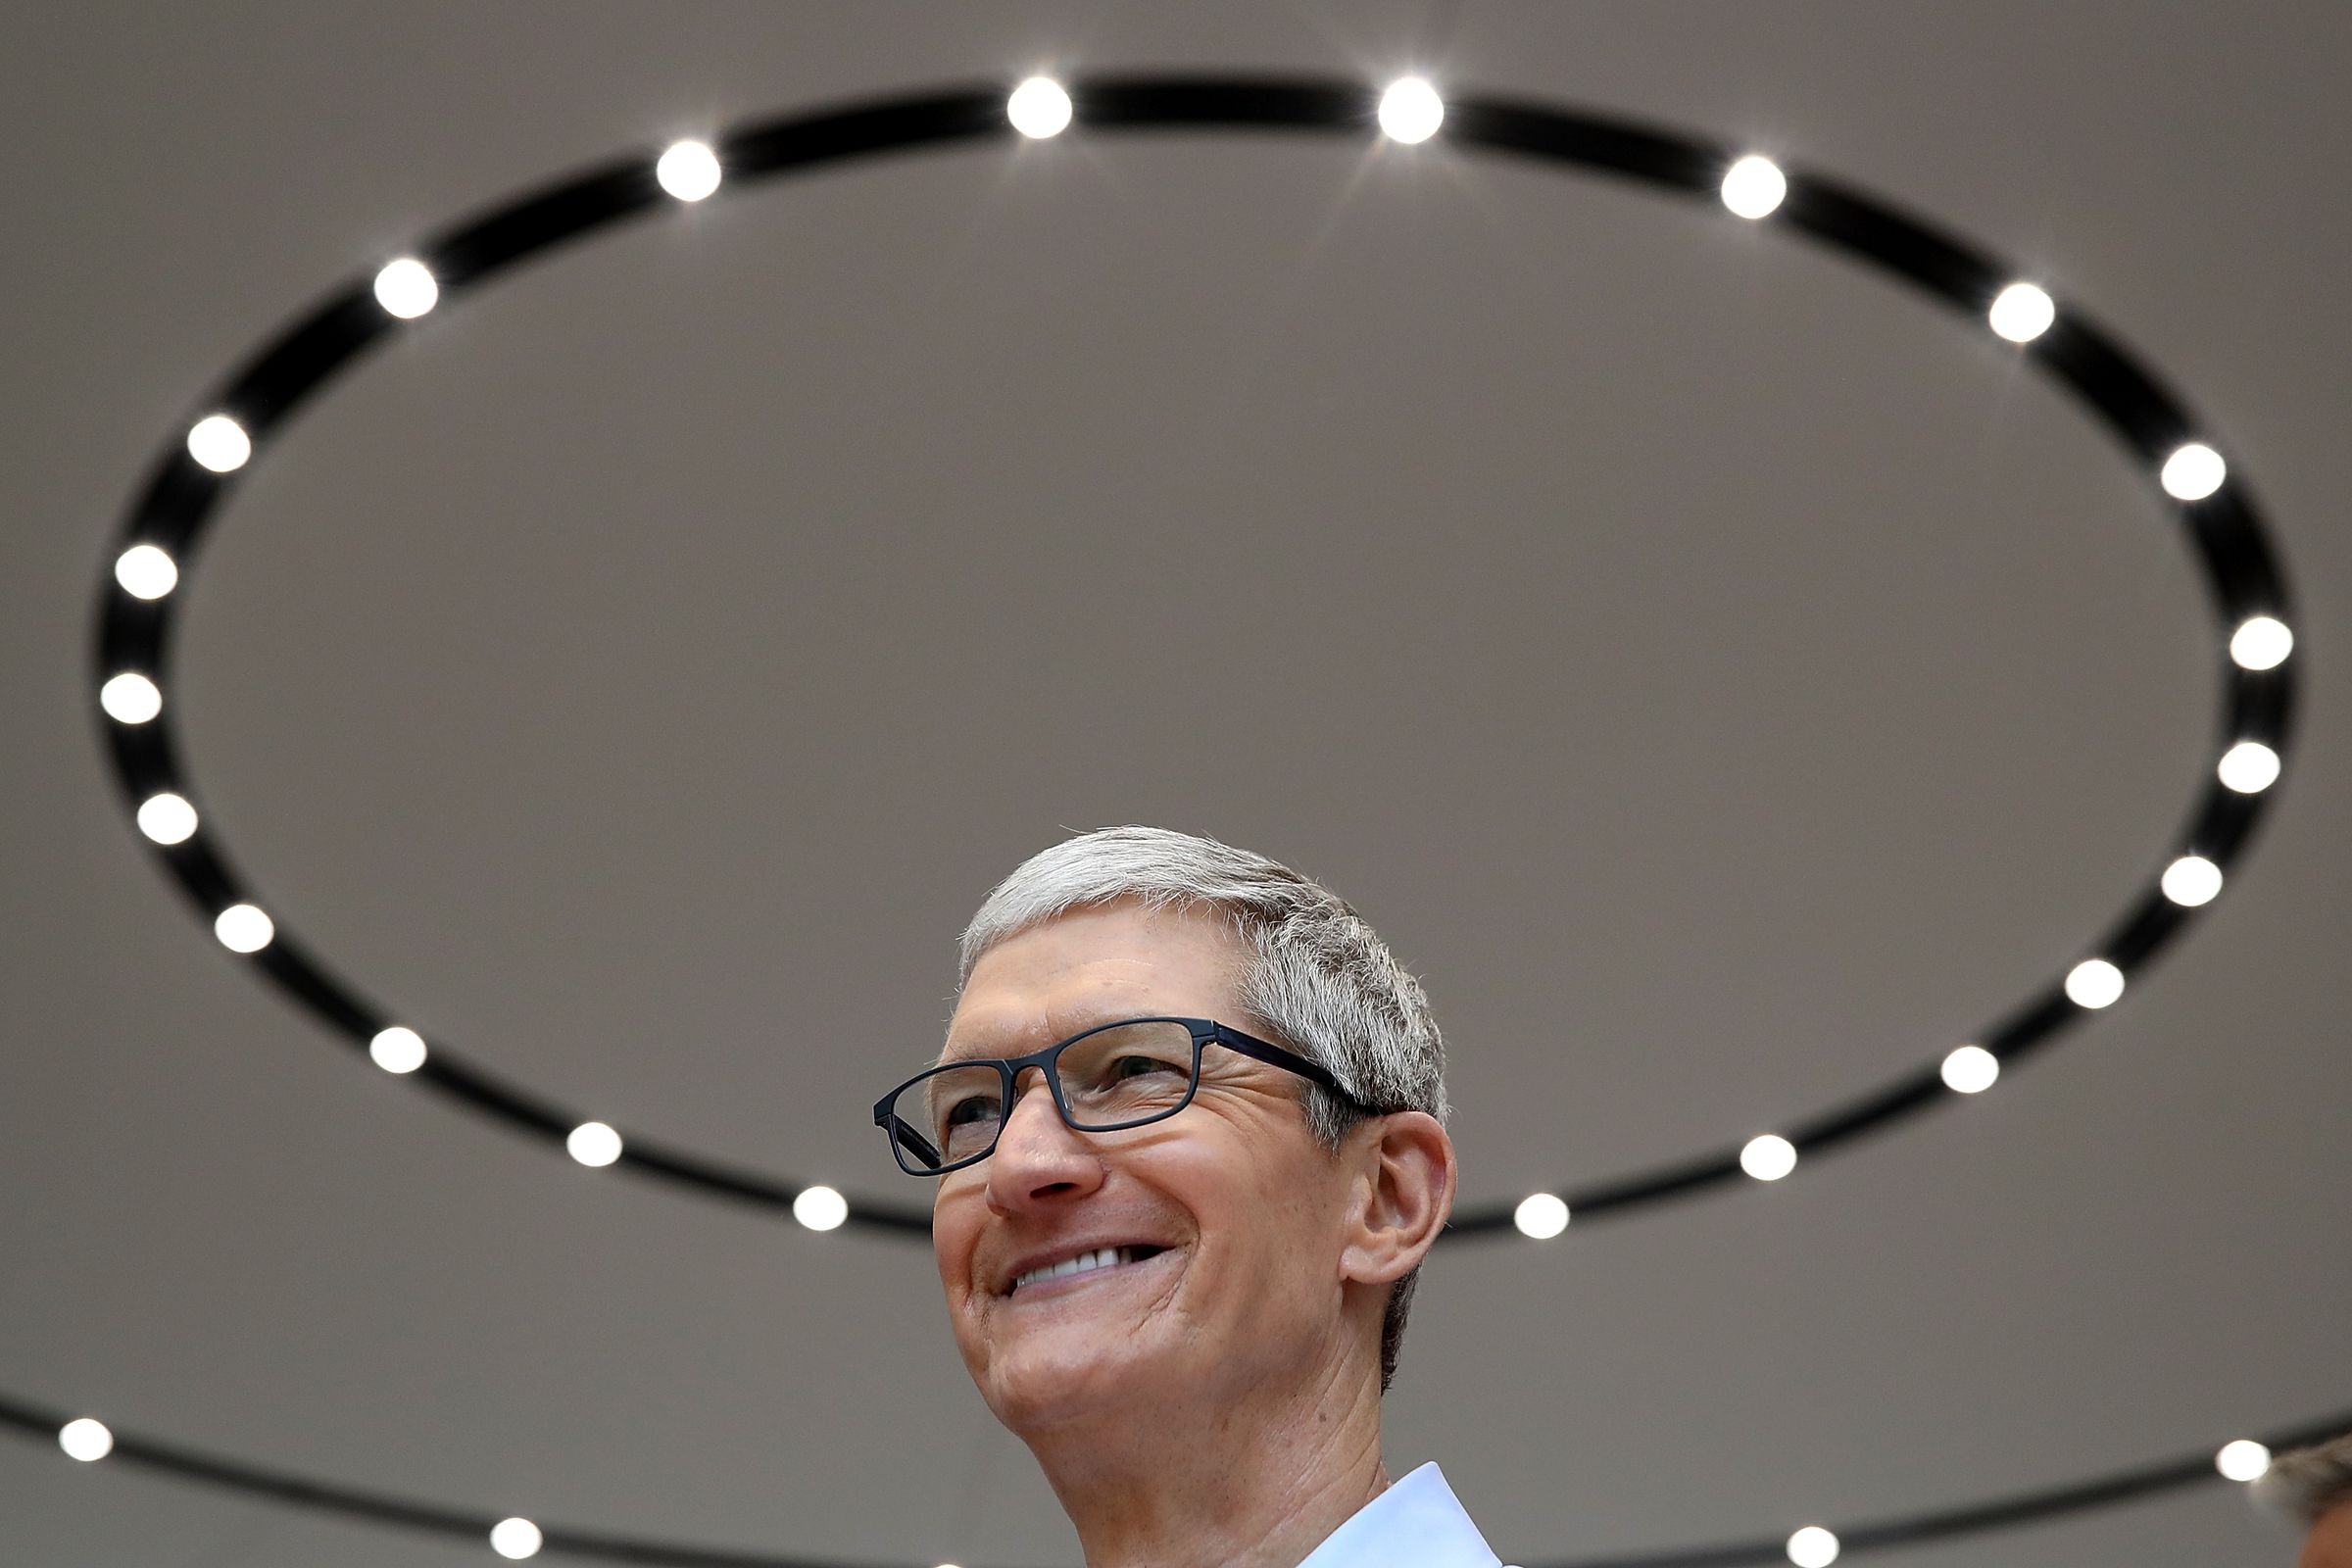 Apple Holds Product Launch Event At New Campus In Cupertino